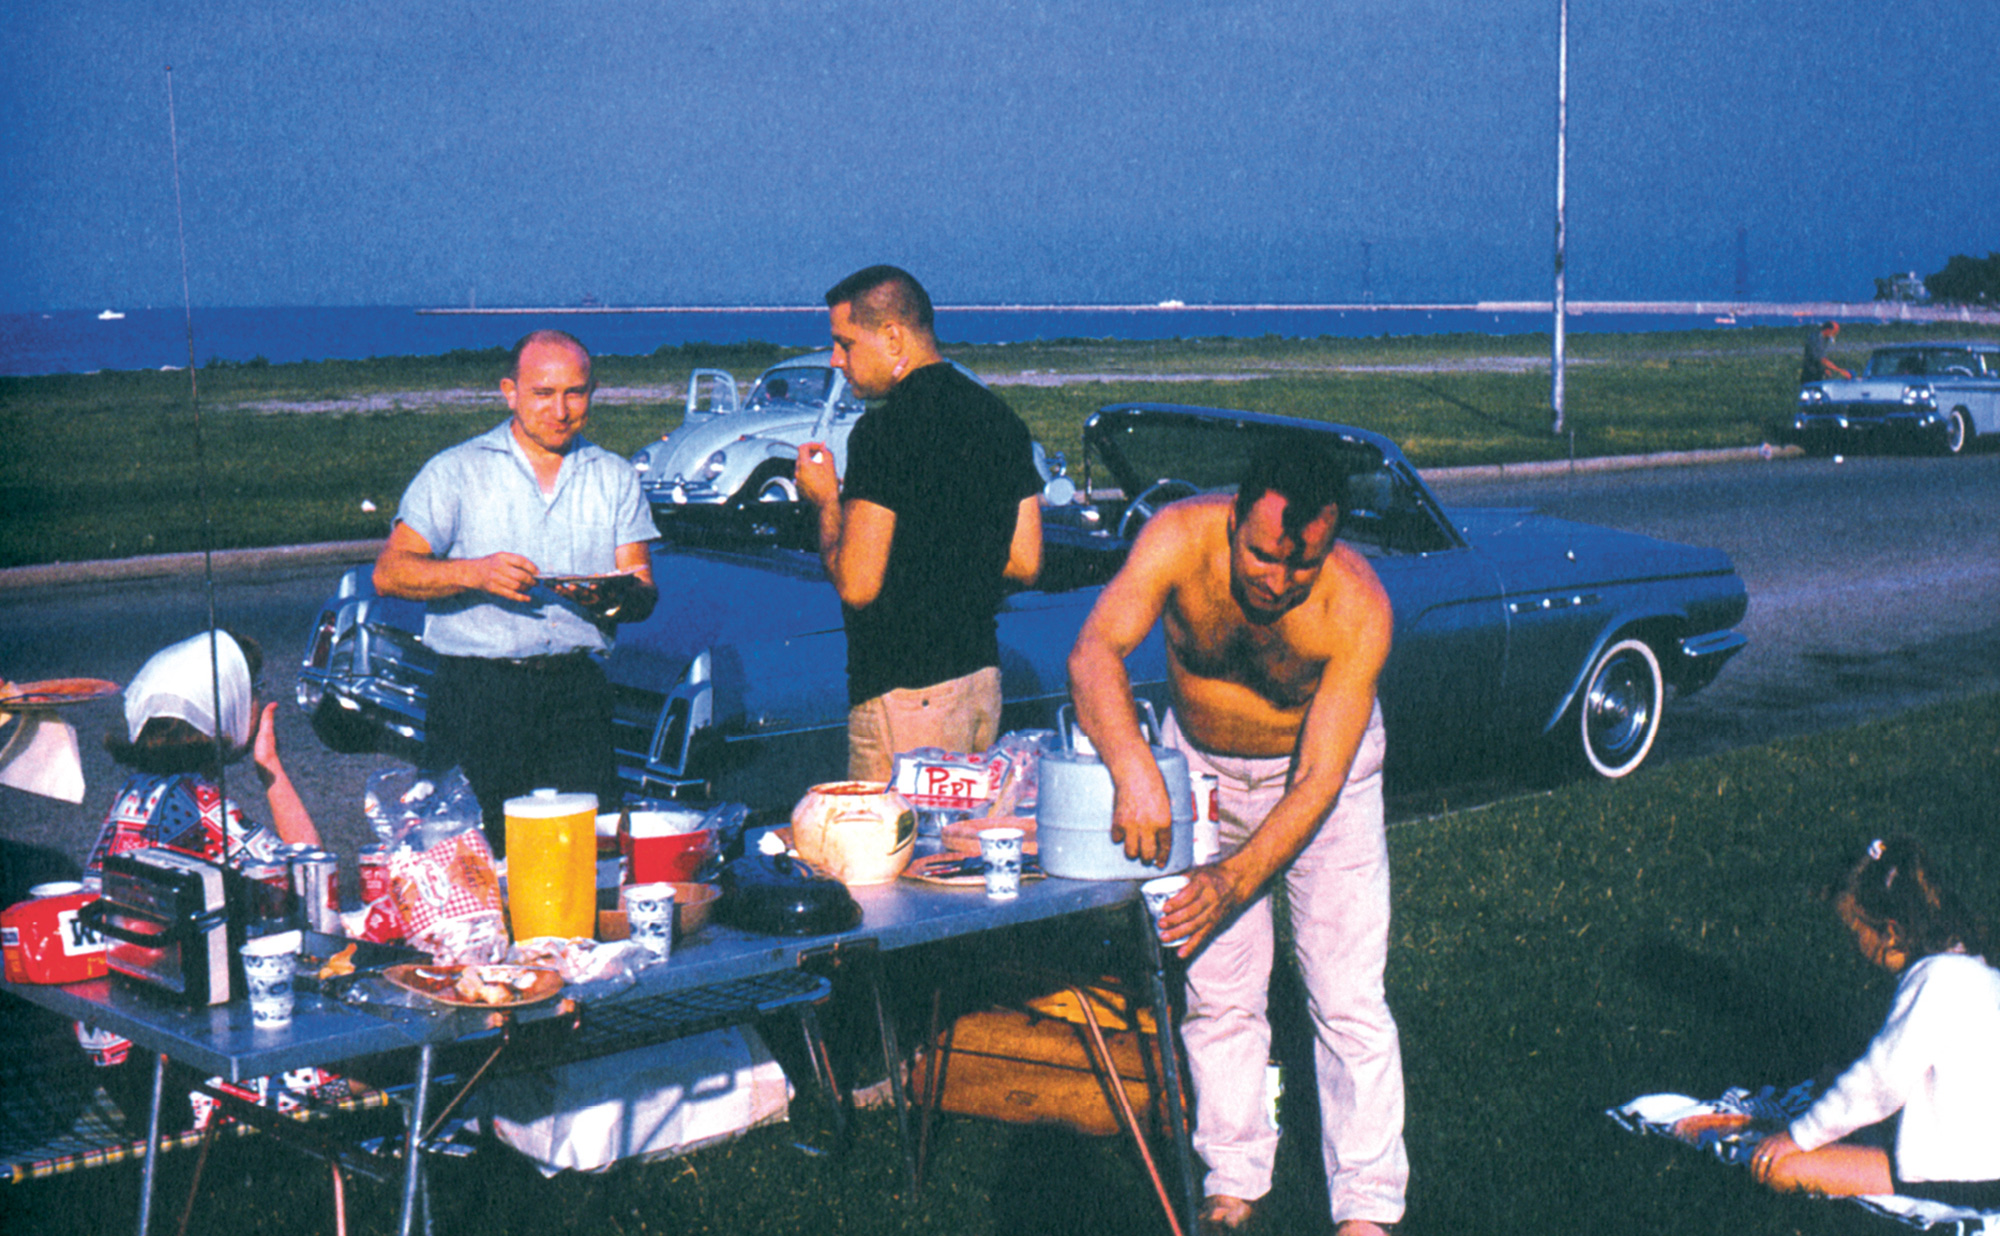 A photograph of a shirtless man at a picnic standing next to his two clothed friends.